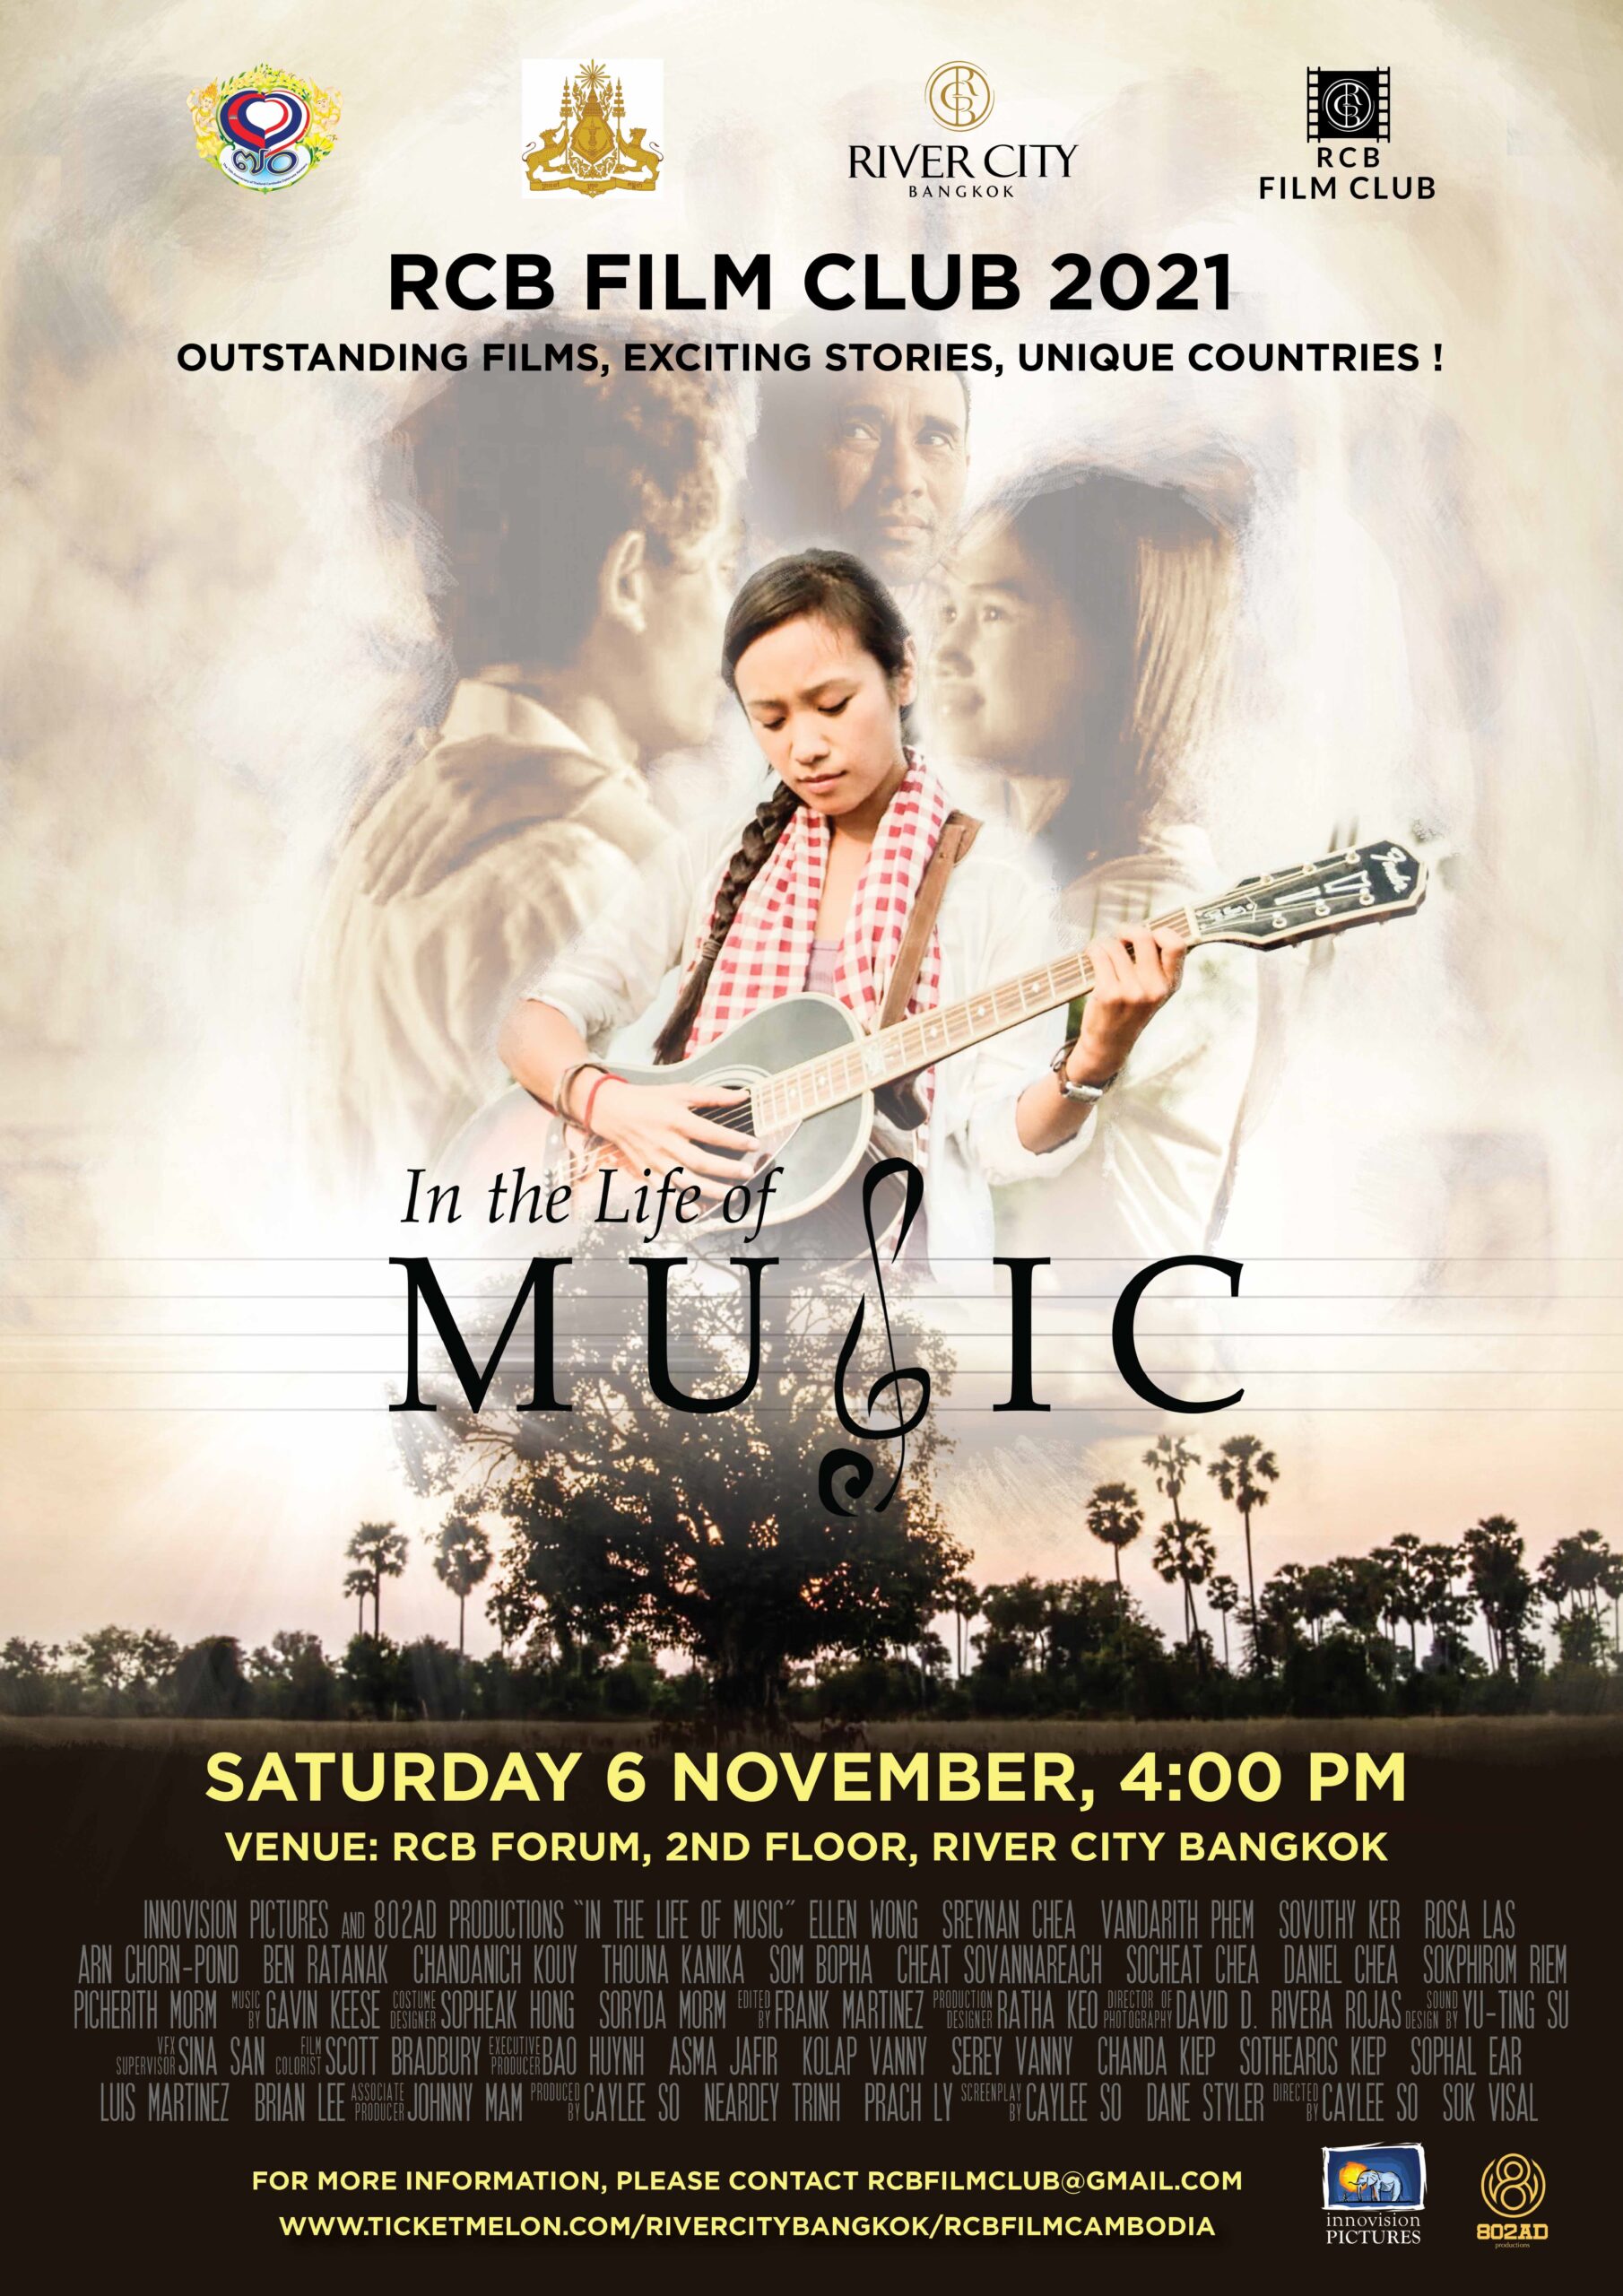 RCB FILM CLUB RE-OPENS- “In the Life of Music’, Cambodia- Sat 6 Nov,4:00 pm